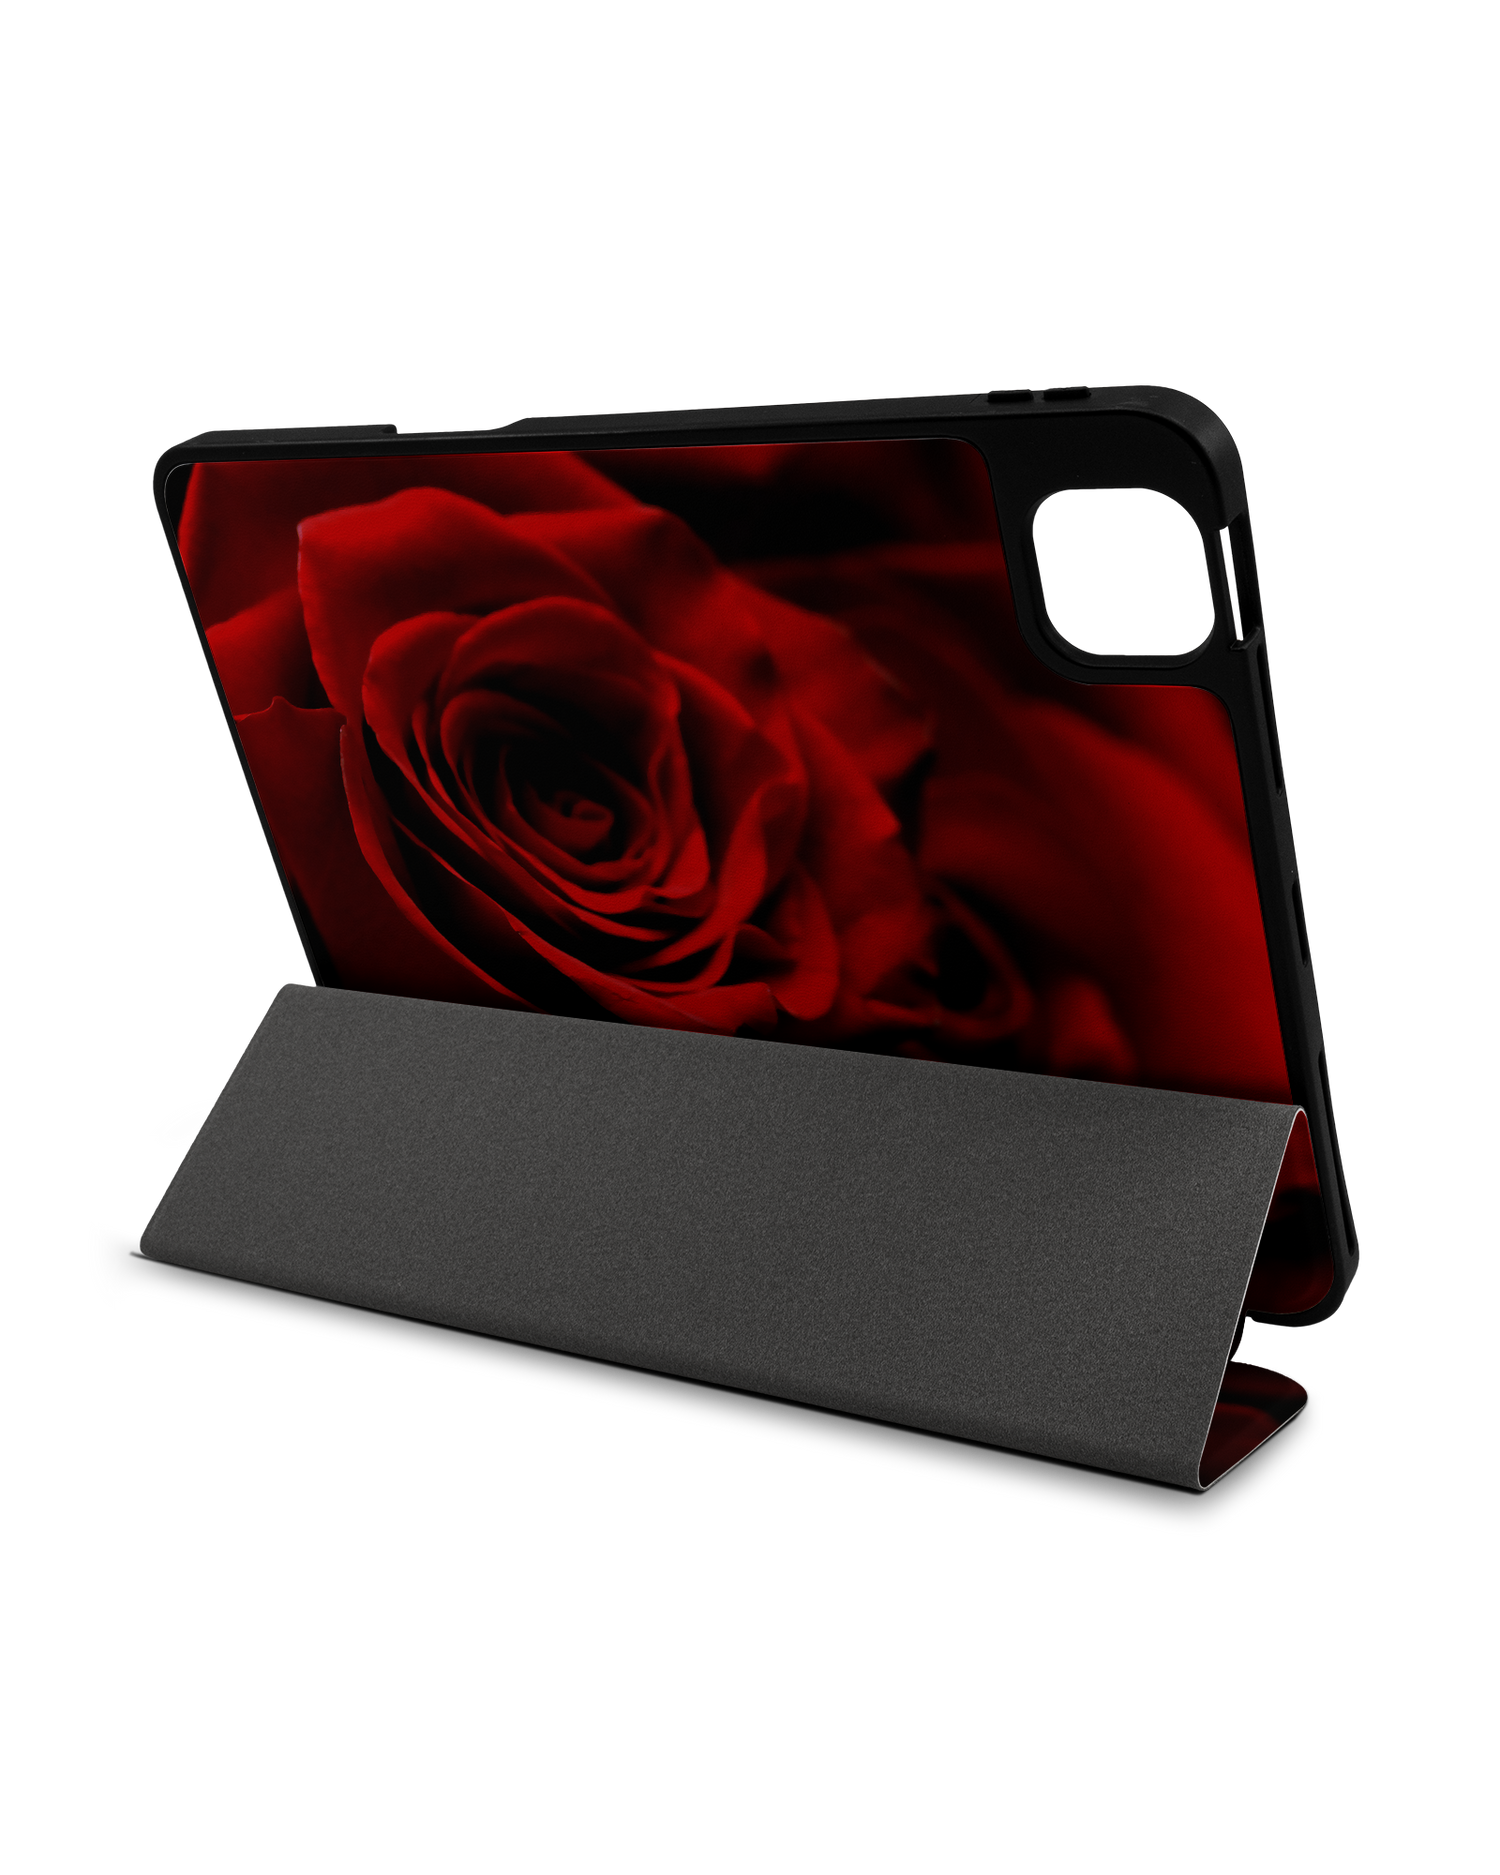 Red Roses iPad Case with Pencil Holder Apple iPad Pro 11